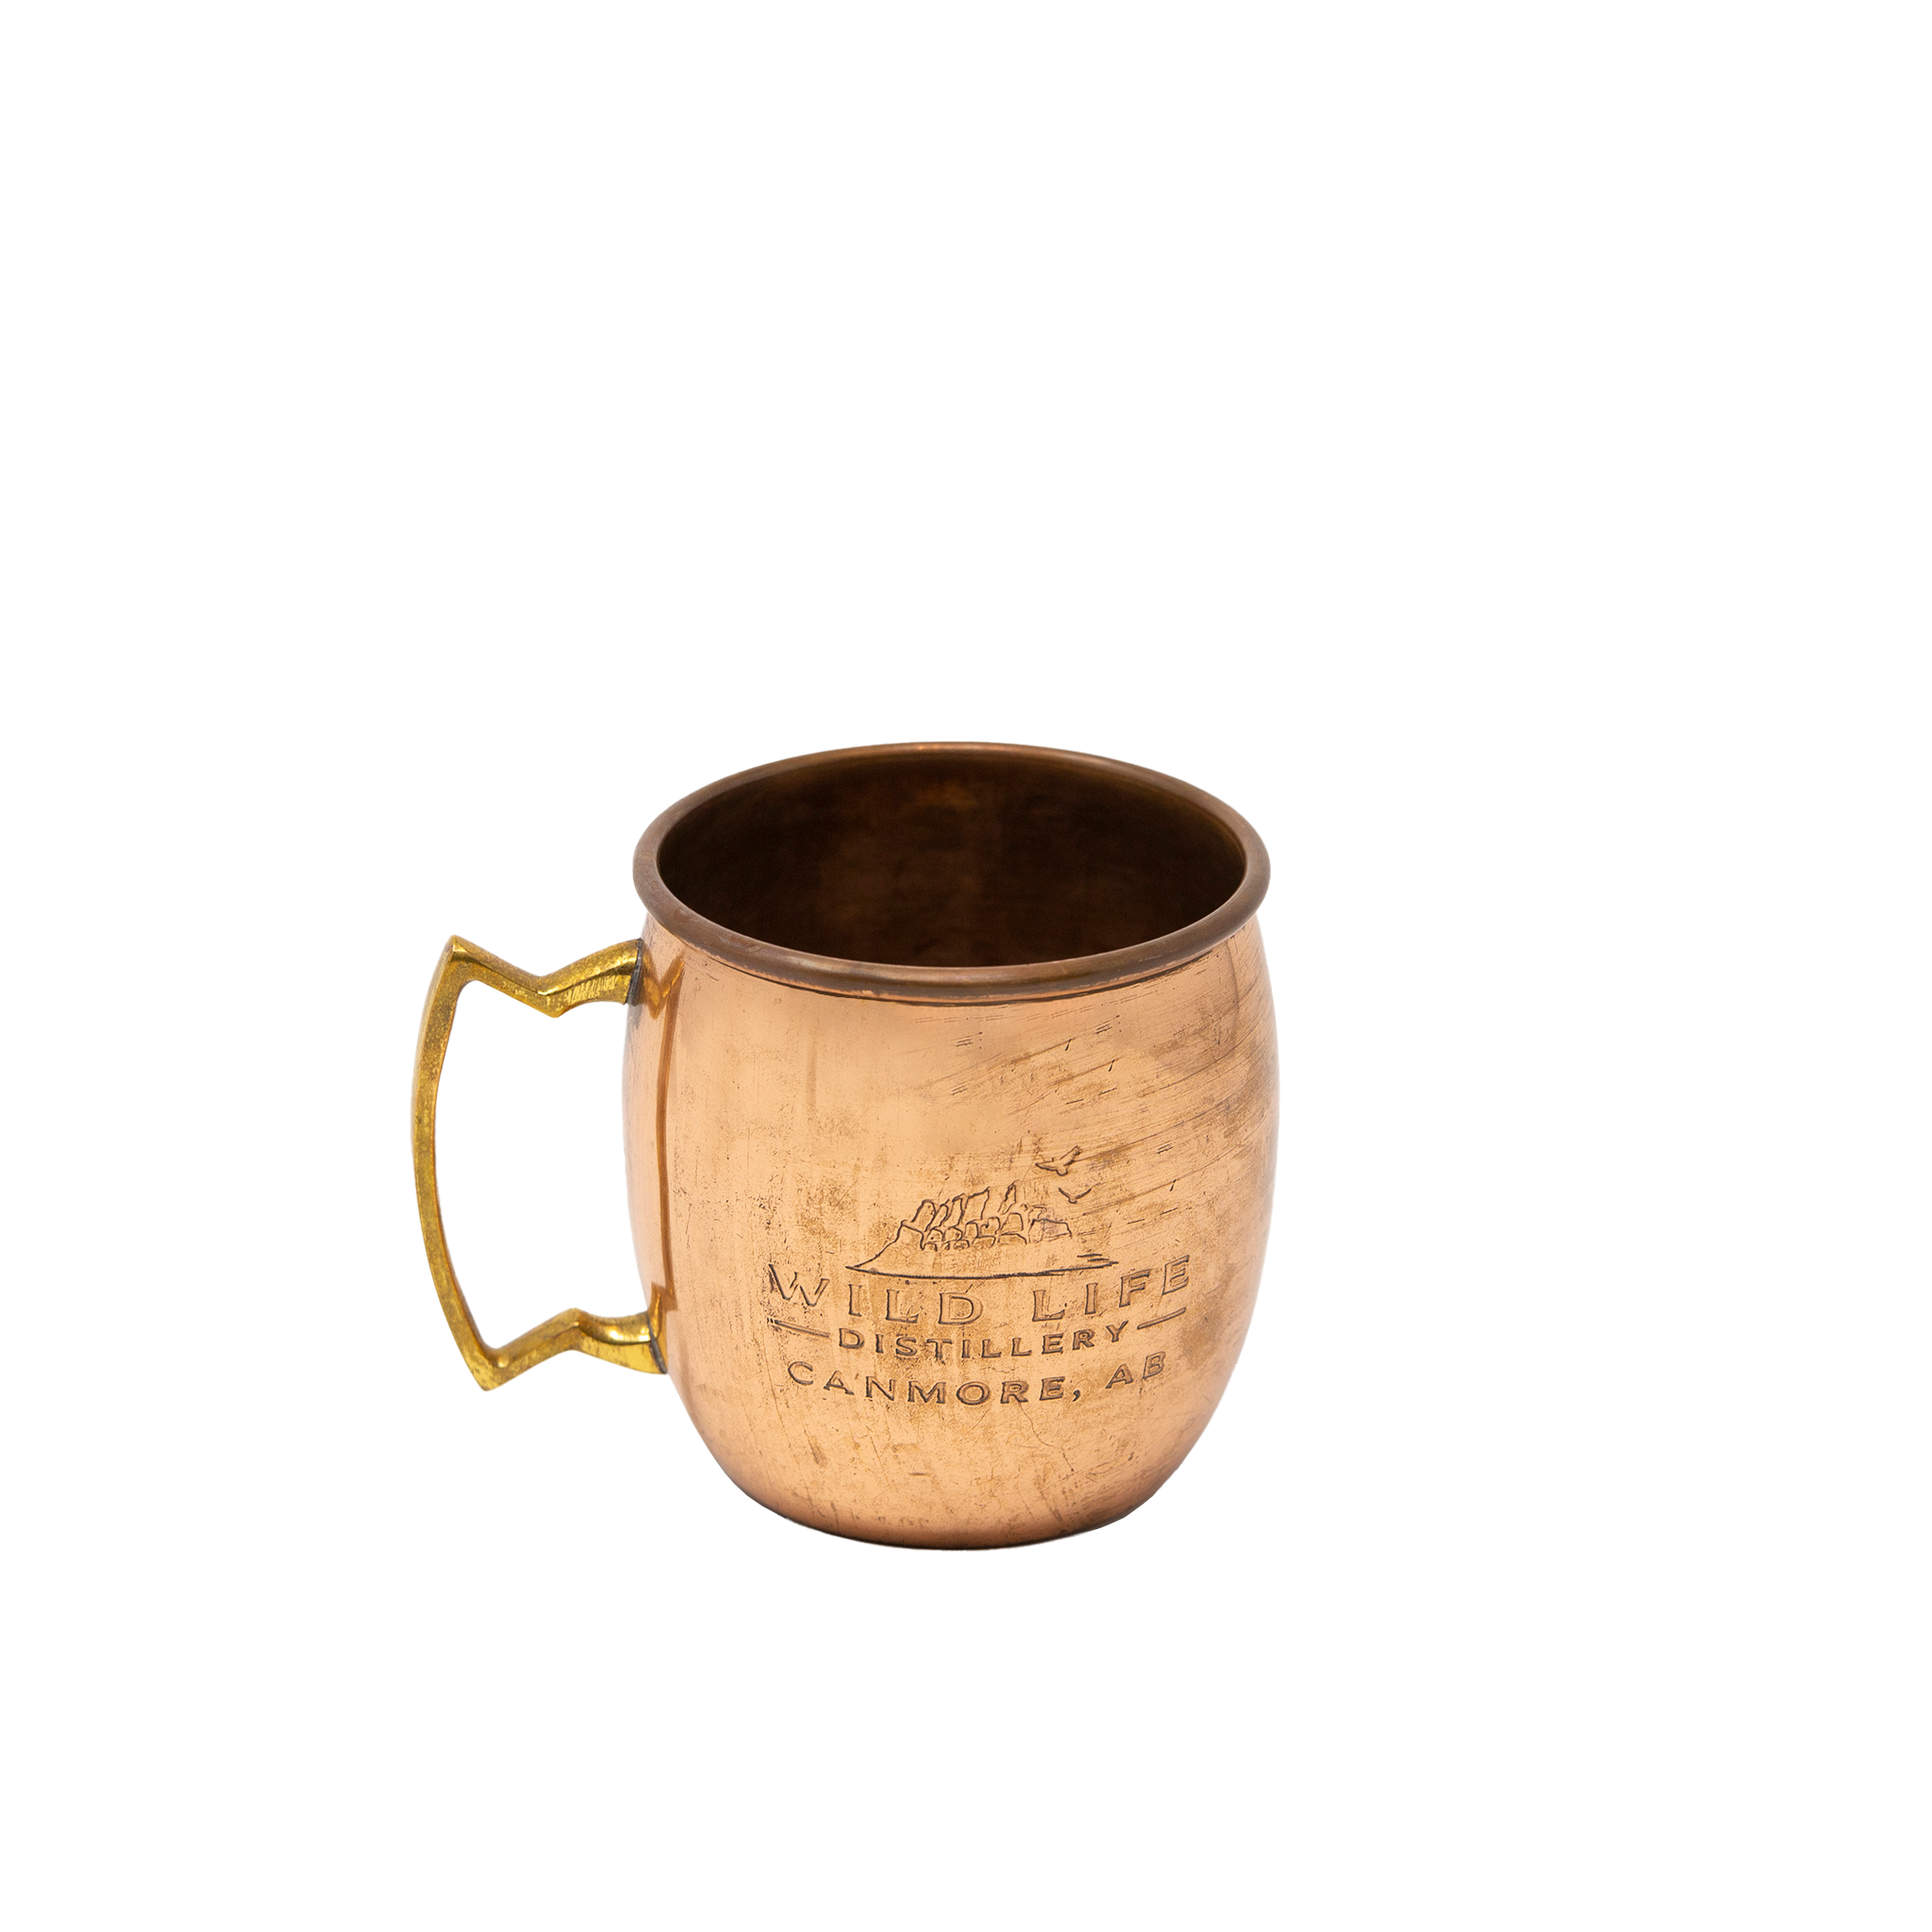 Copper Mule Mug with Wild Life Distillery Logo and Canmore, Alberta